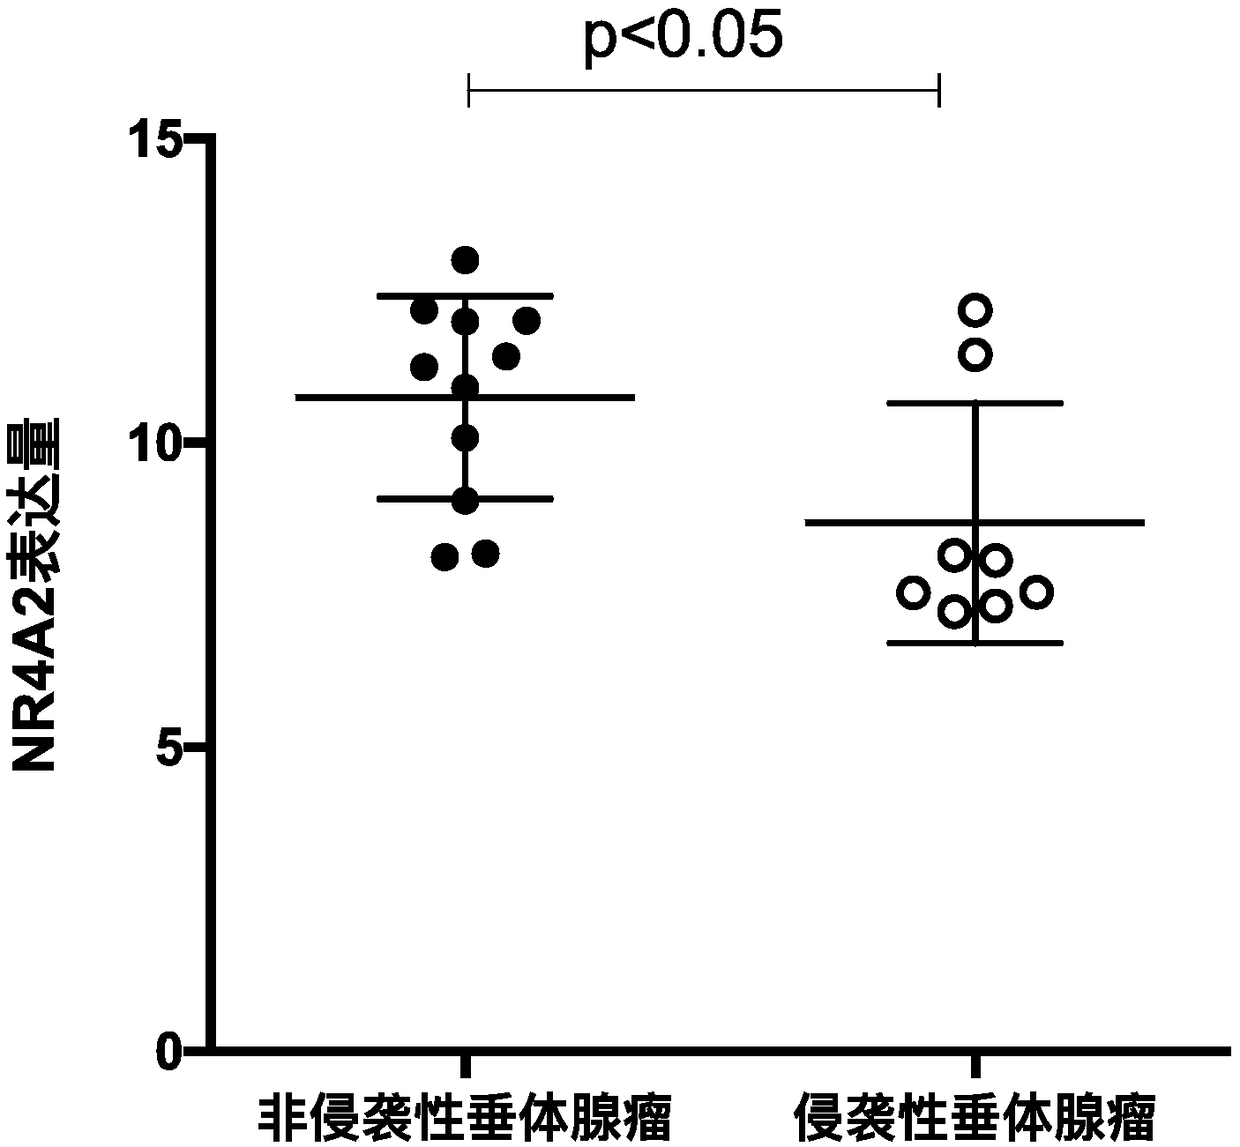 Application and expression of NR4A2 gene in pituitary adenoma biomarker